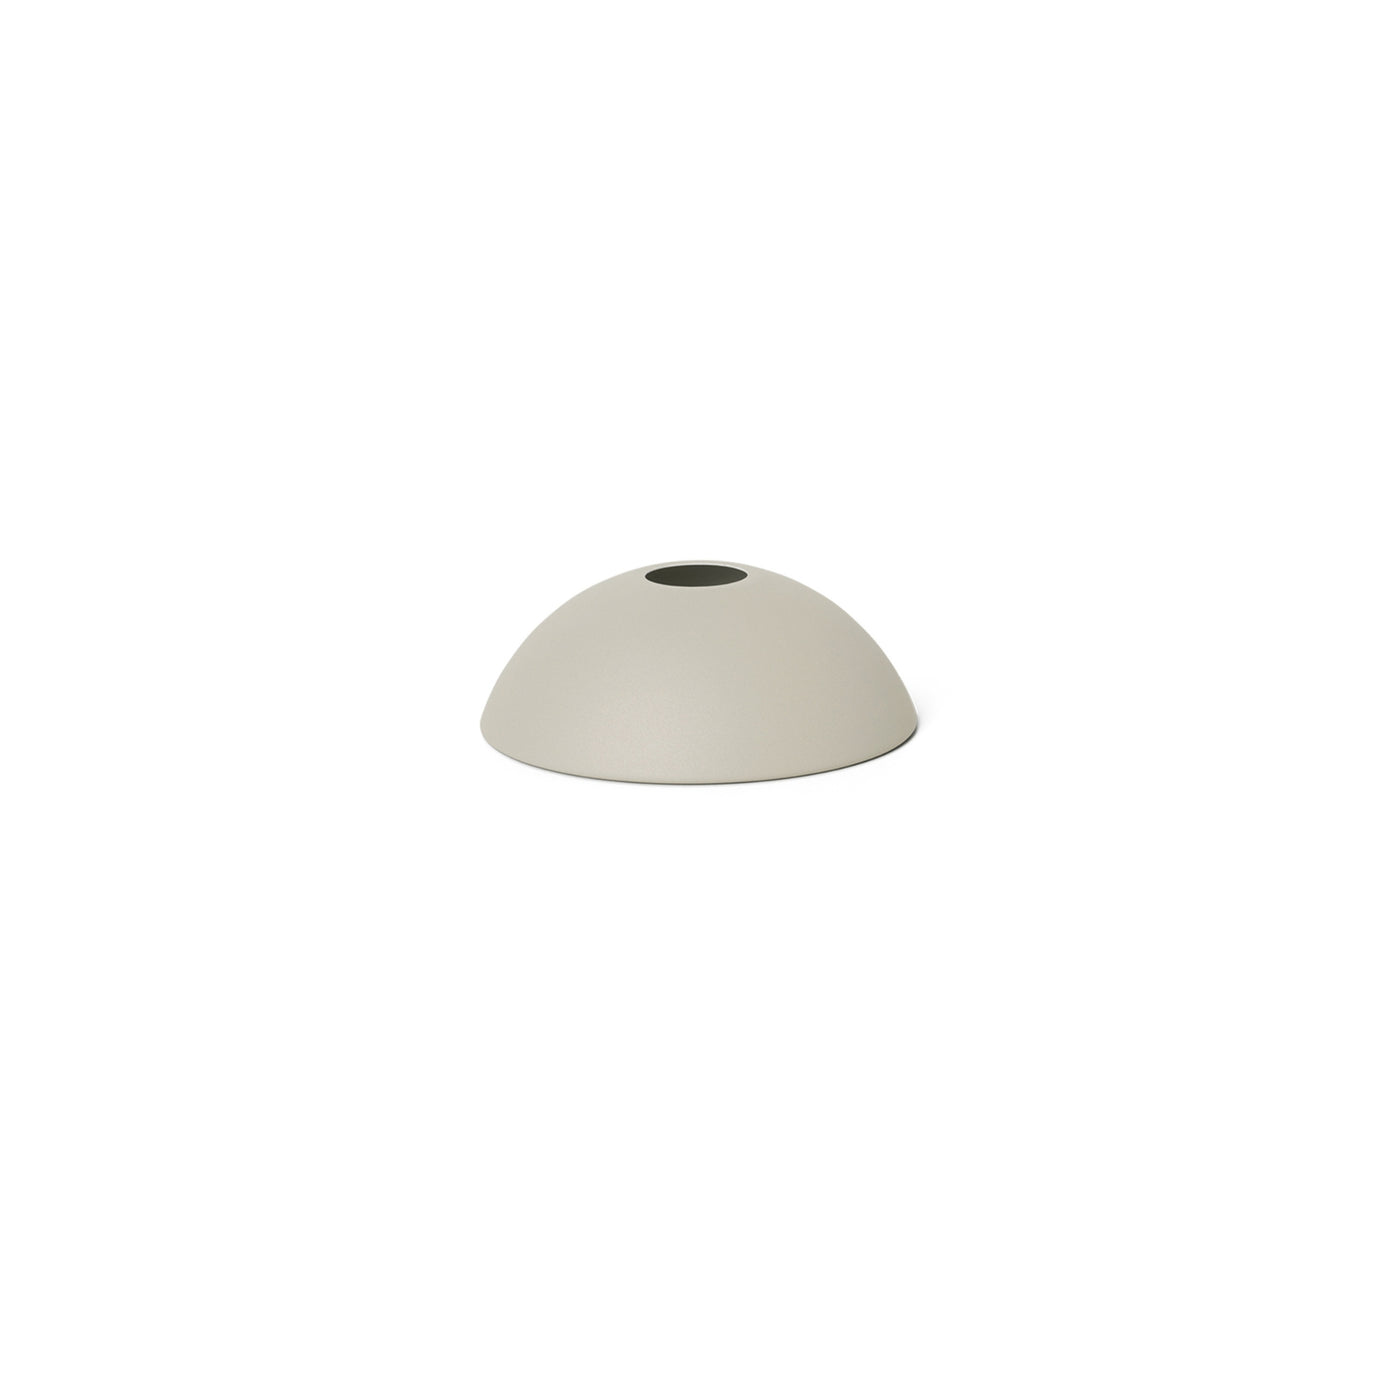 ferm LIVING Collect Lighting hoop Shade. Shop online at someday designs. #colour_light-grey